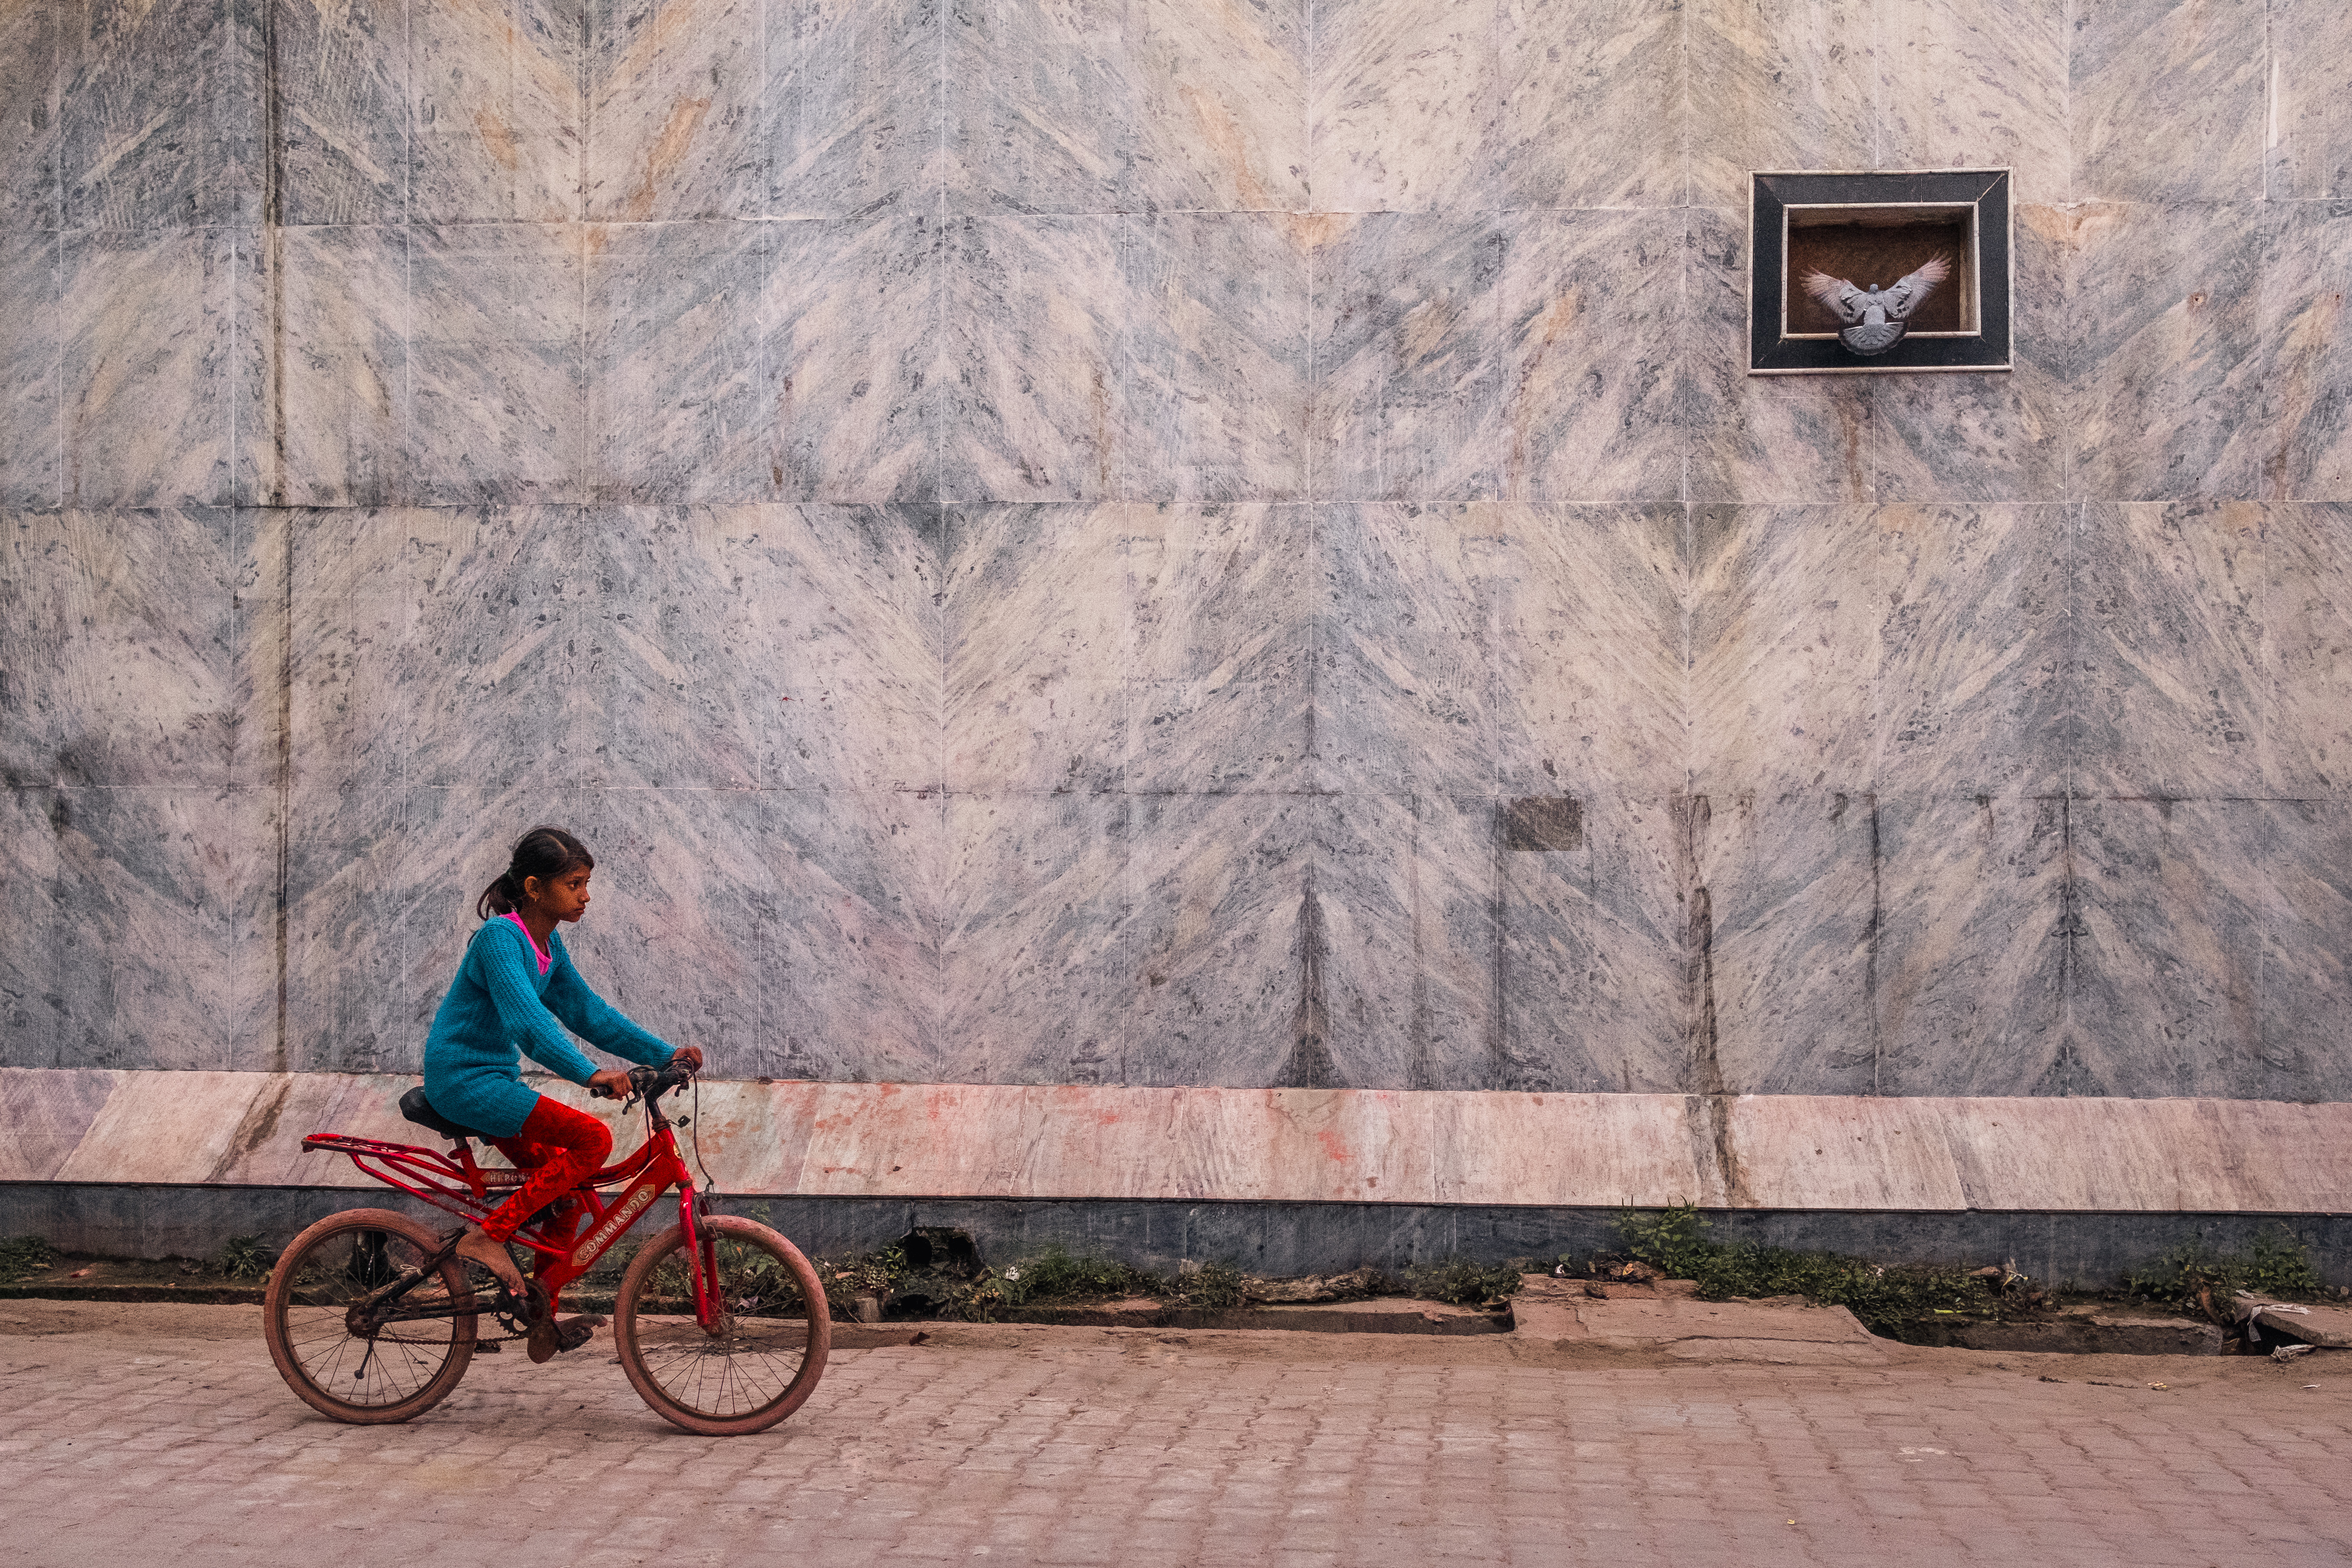 India Street Photography During Holi Festival. girl rides her red bike as a bird flaps his wings in a window. Images by Jason Vinson